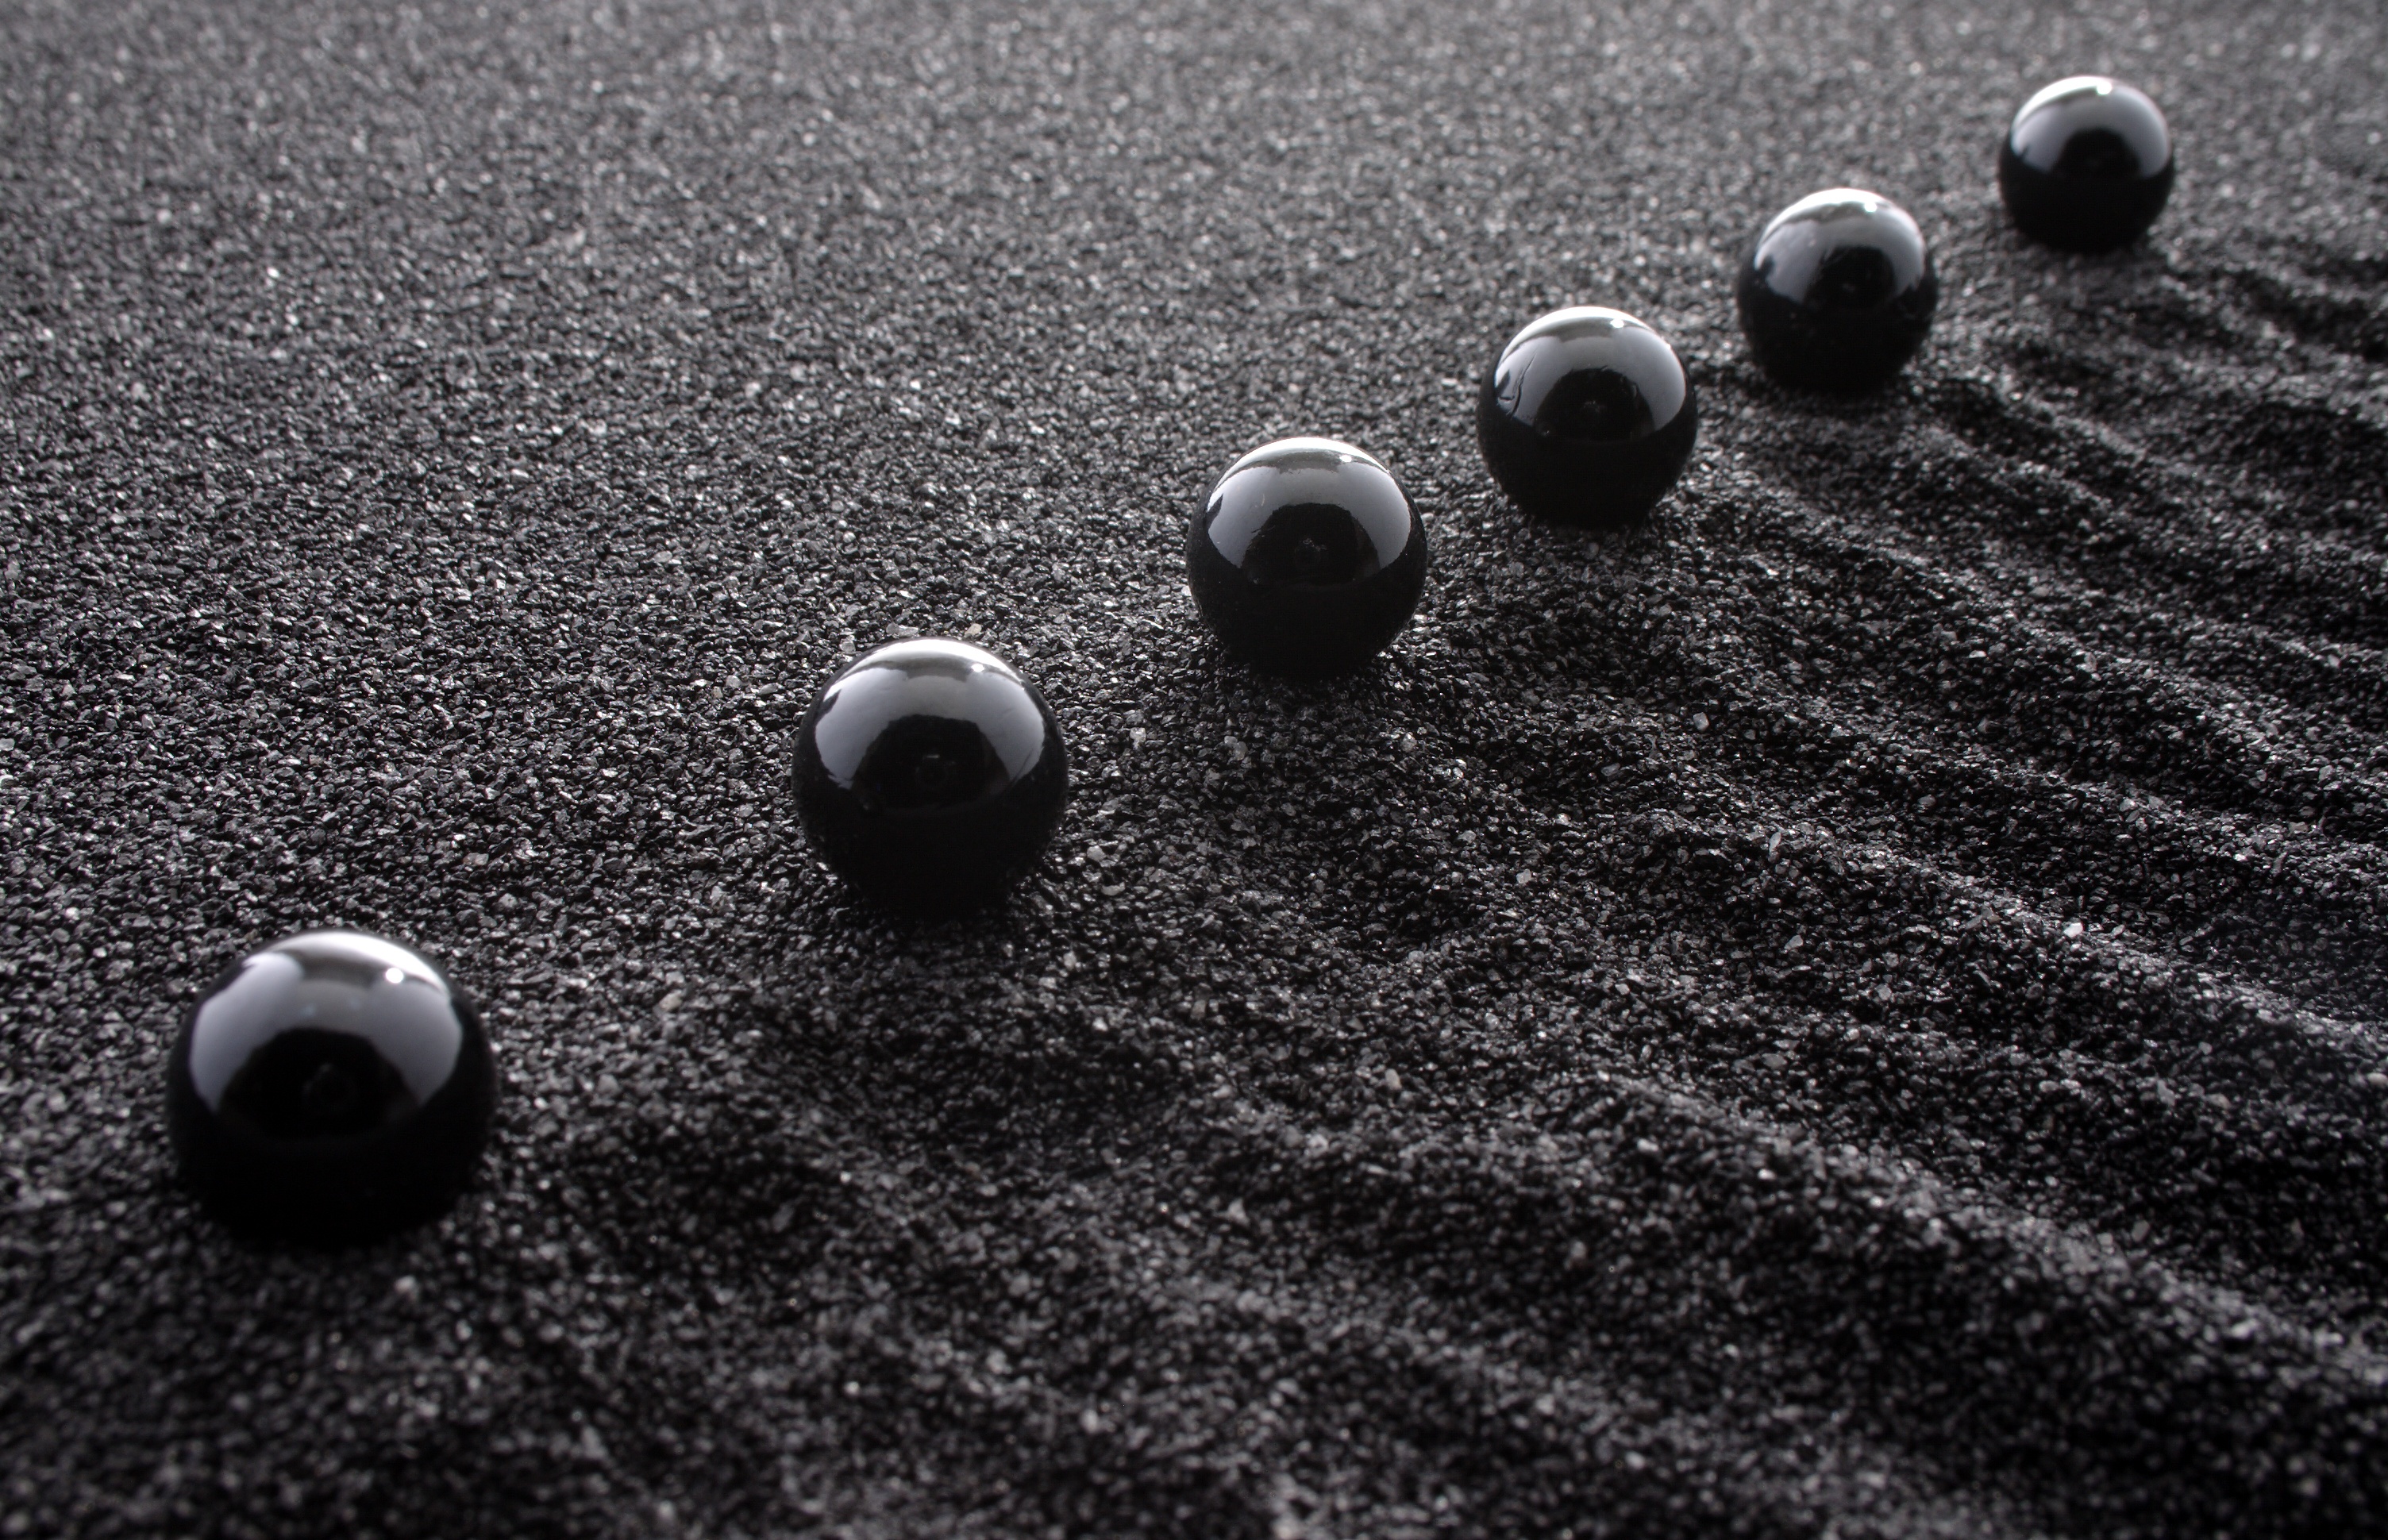 Black marbles in a straight line on sand